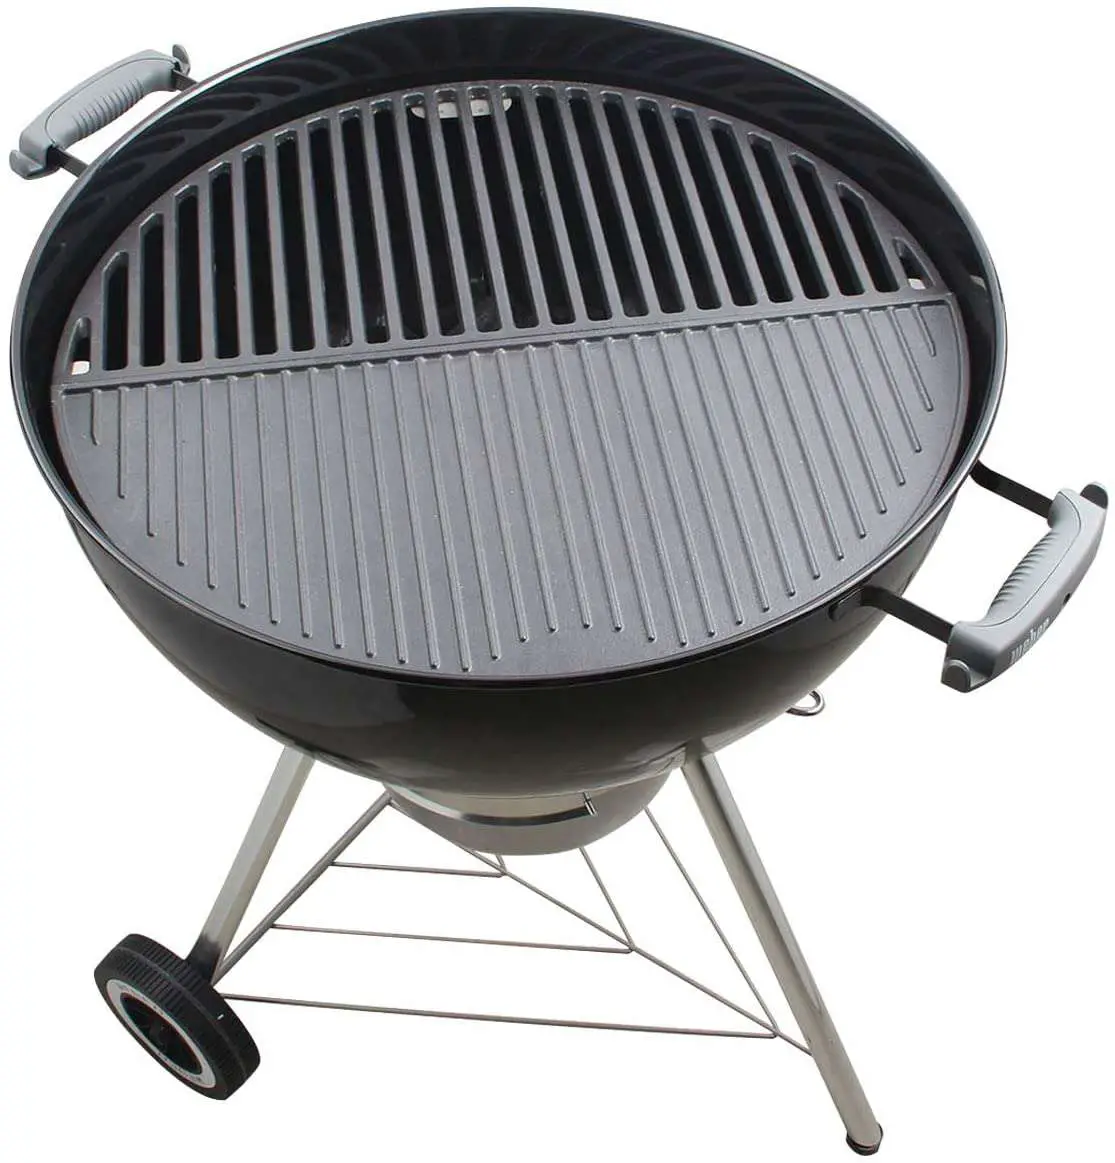 Amazon.com : KAMaster Cast Iron Cooking Grate Grill ...